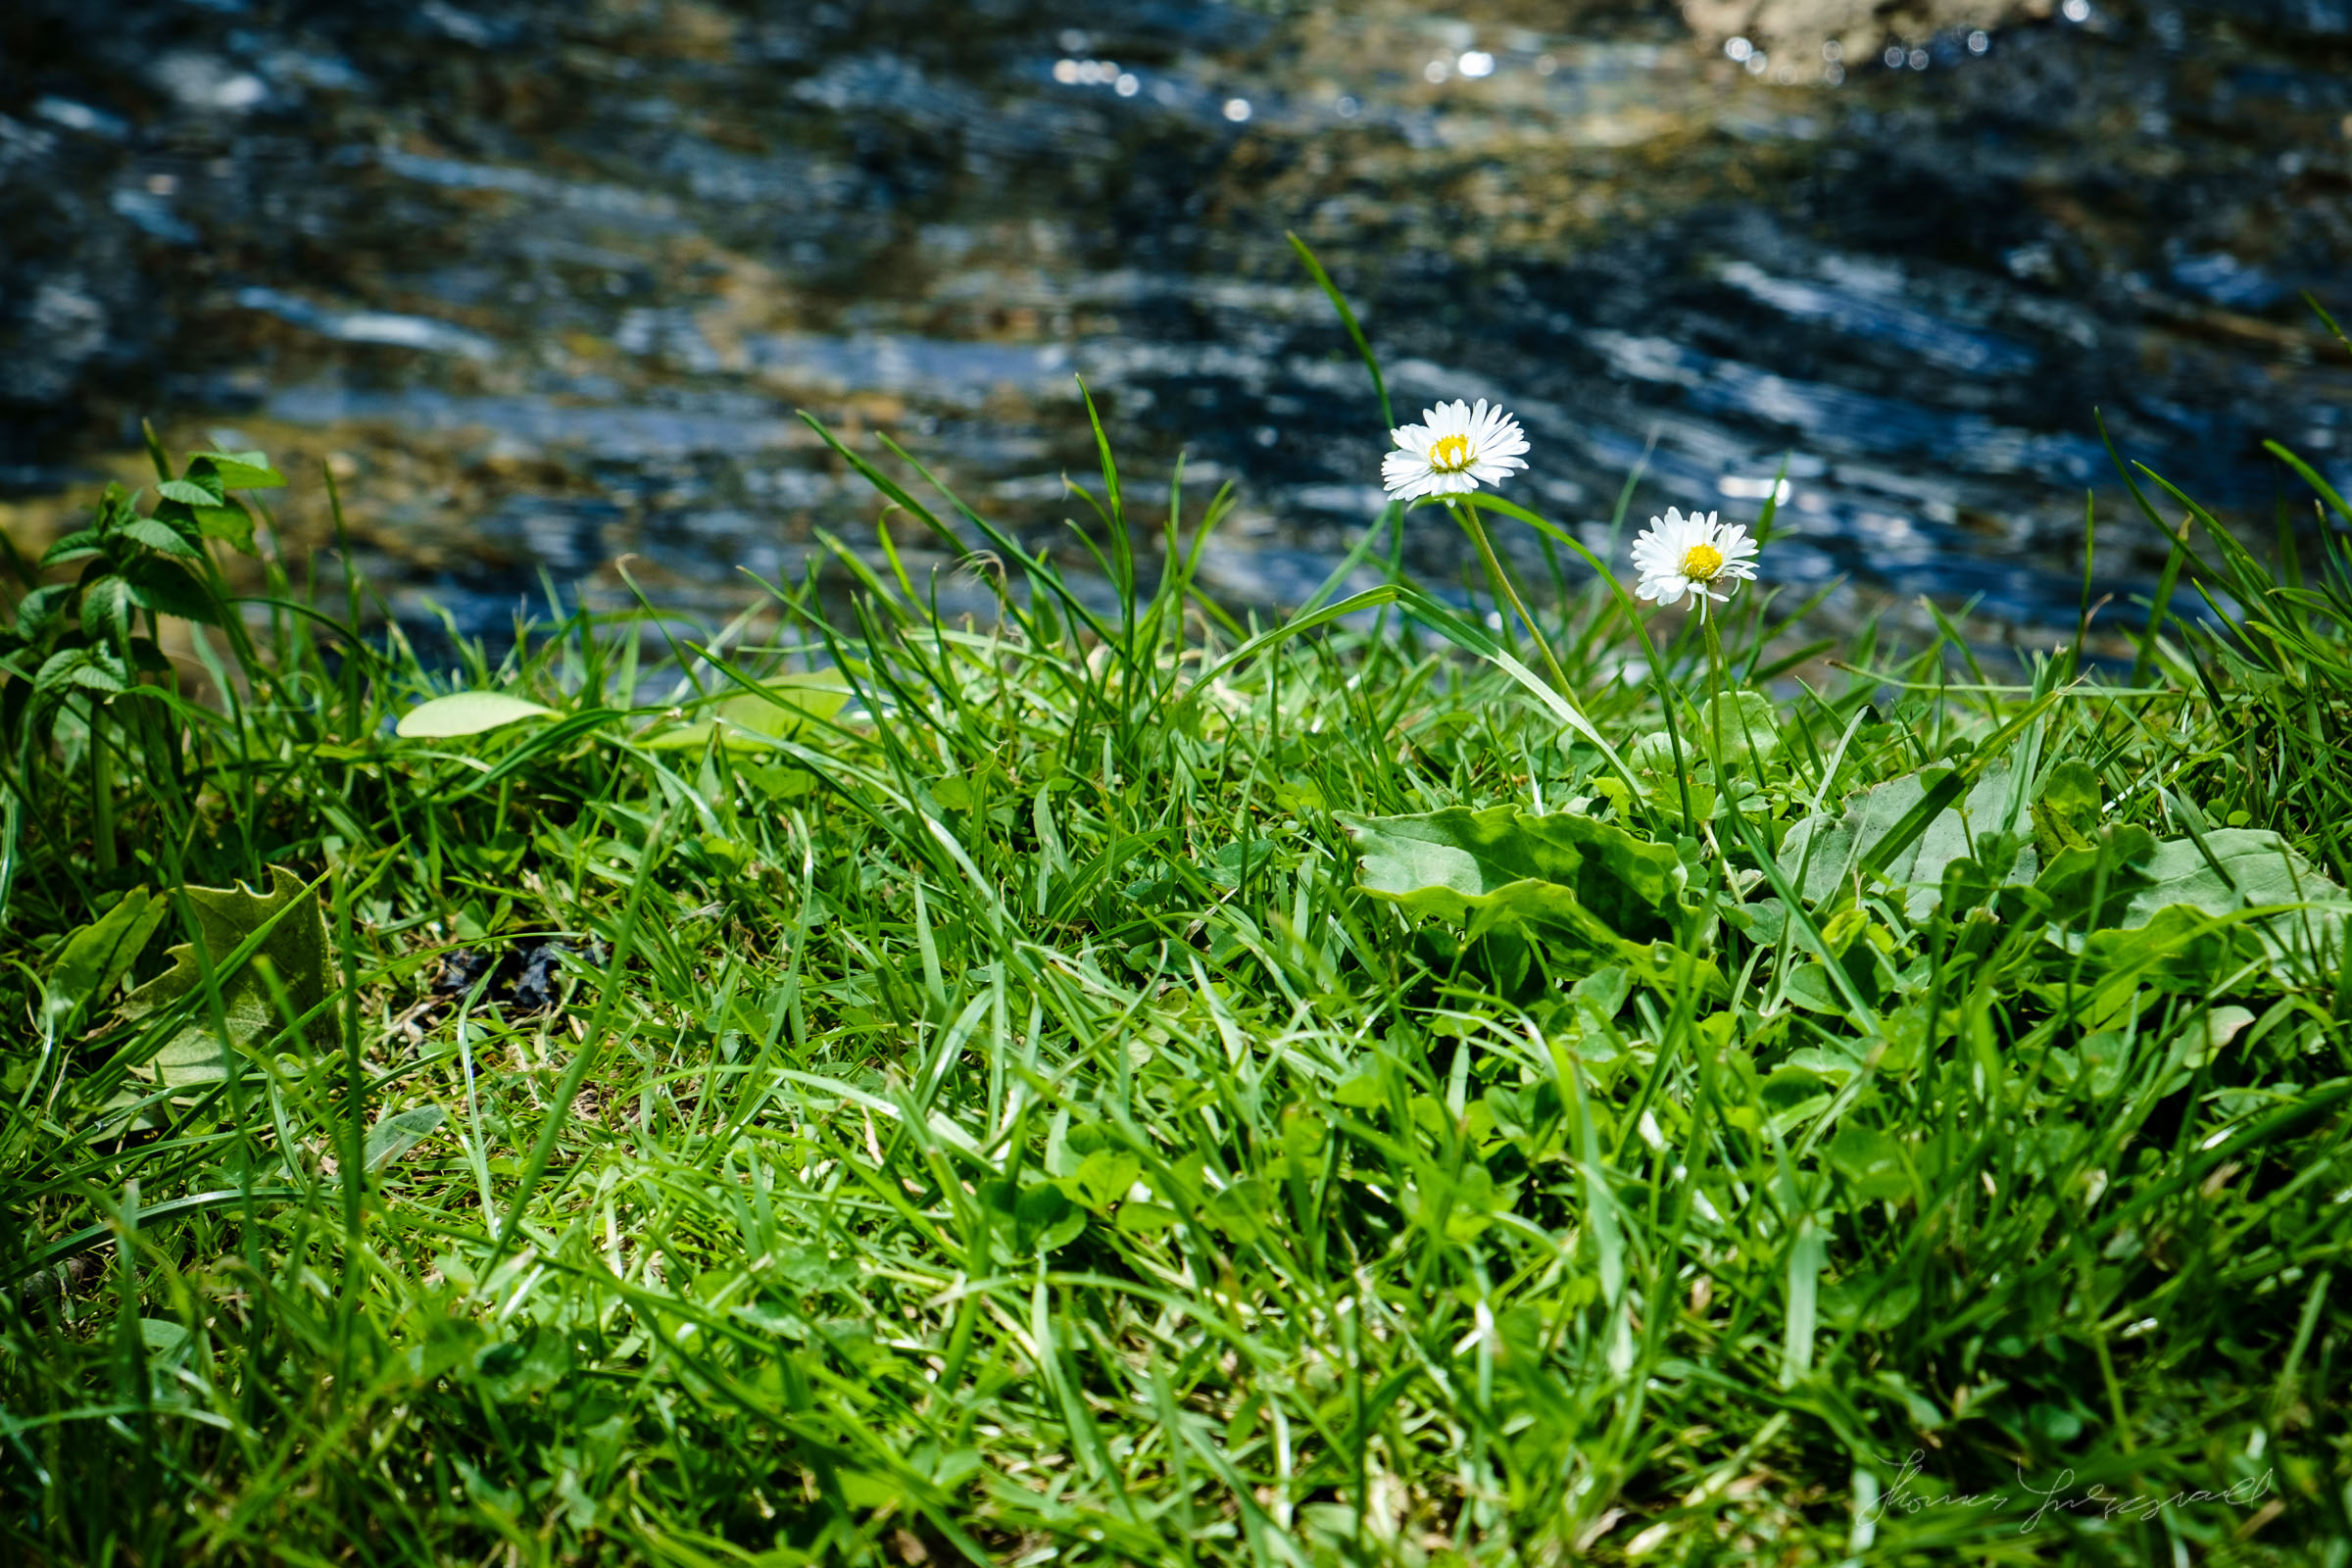 Daisies by the edge of the water